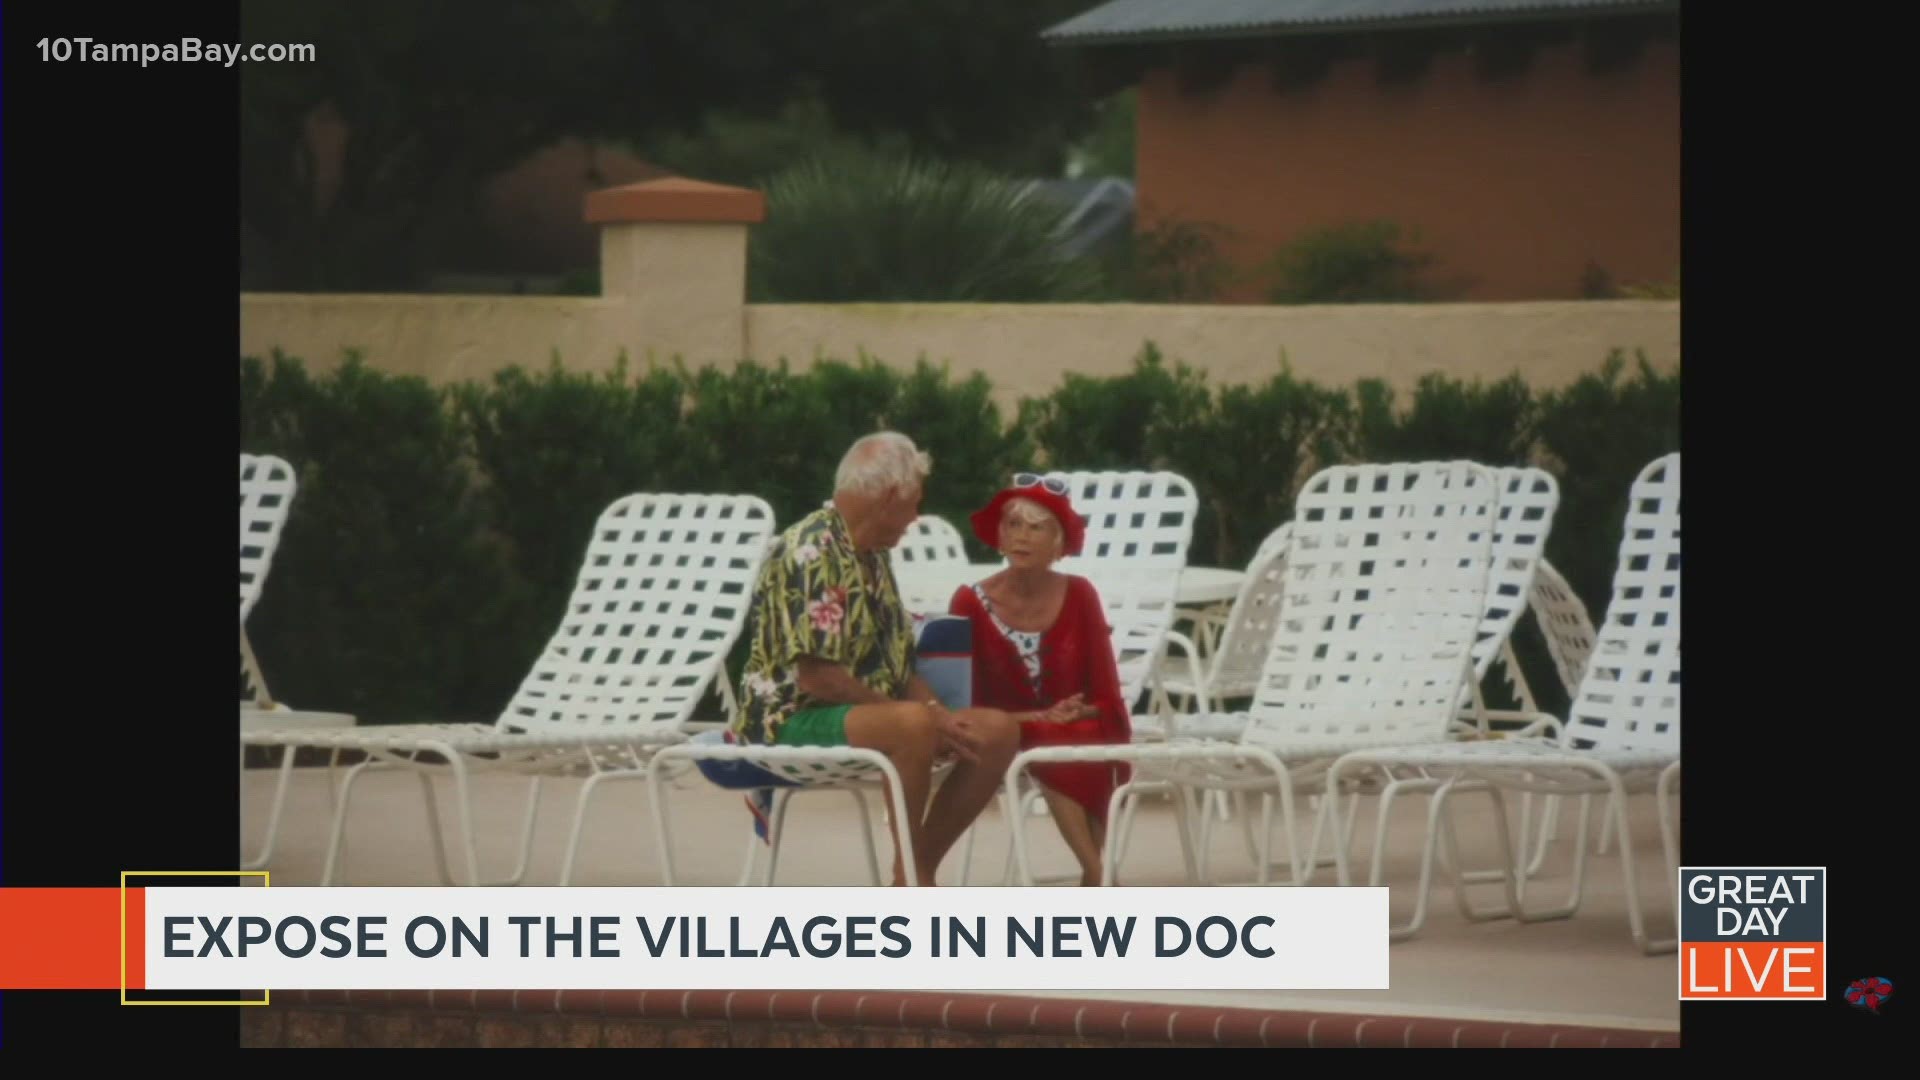 Florida-based filmmaker talks new film uncovering the utopian facade of The Villages